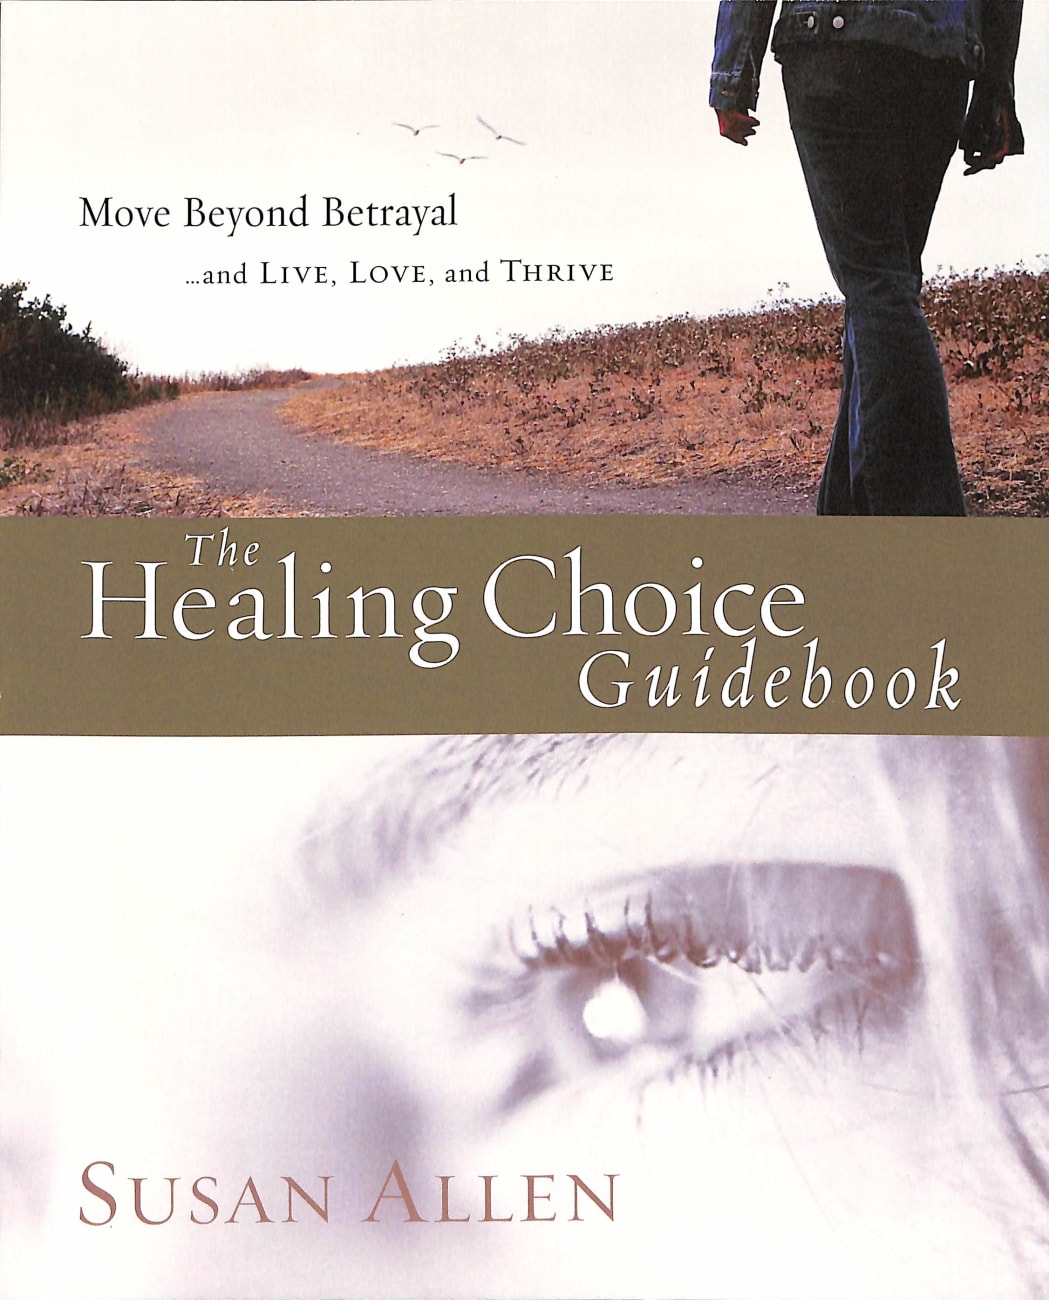 How to Move Beyond Betrayal (Workbook) (Healing Choice Series) Paperback